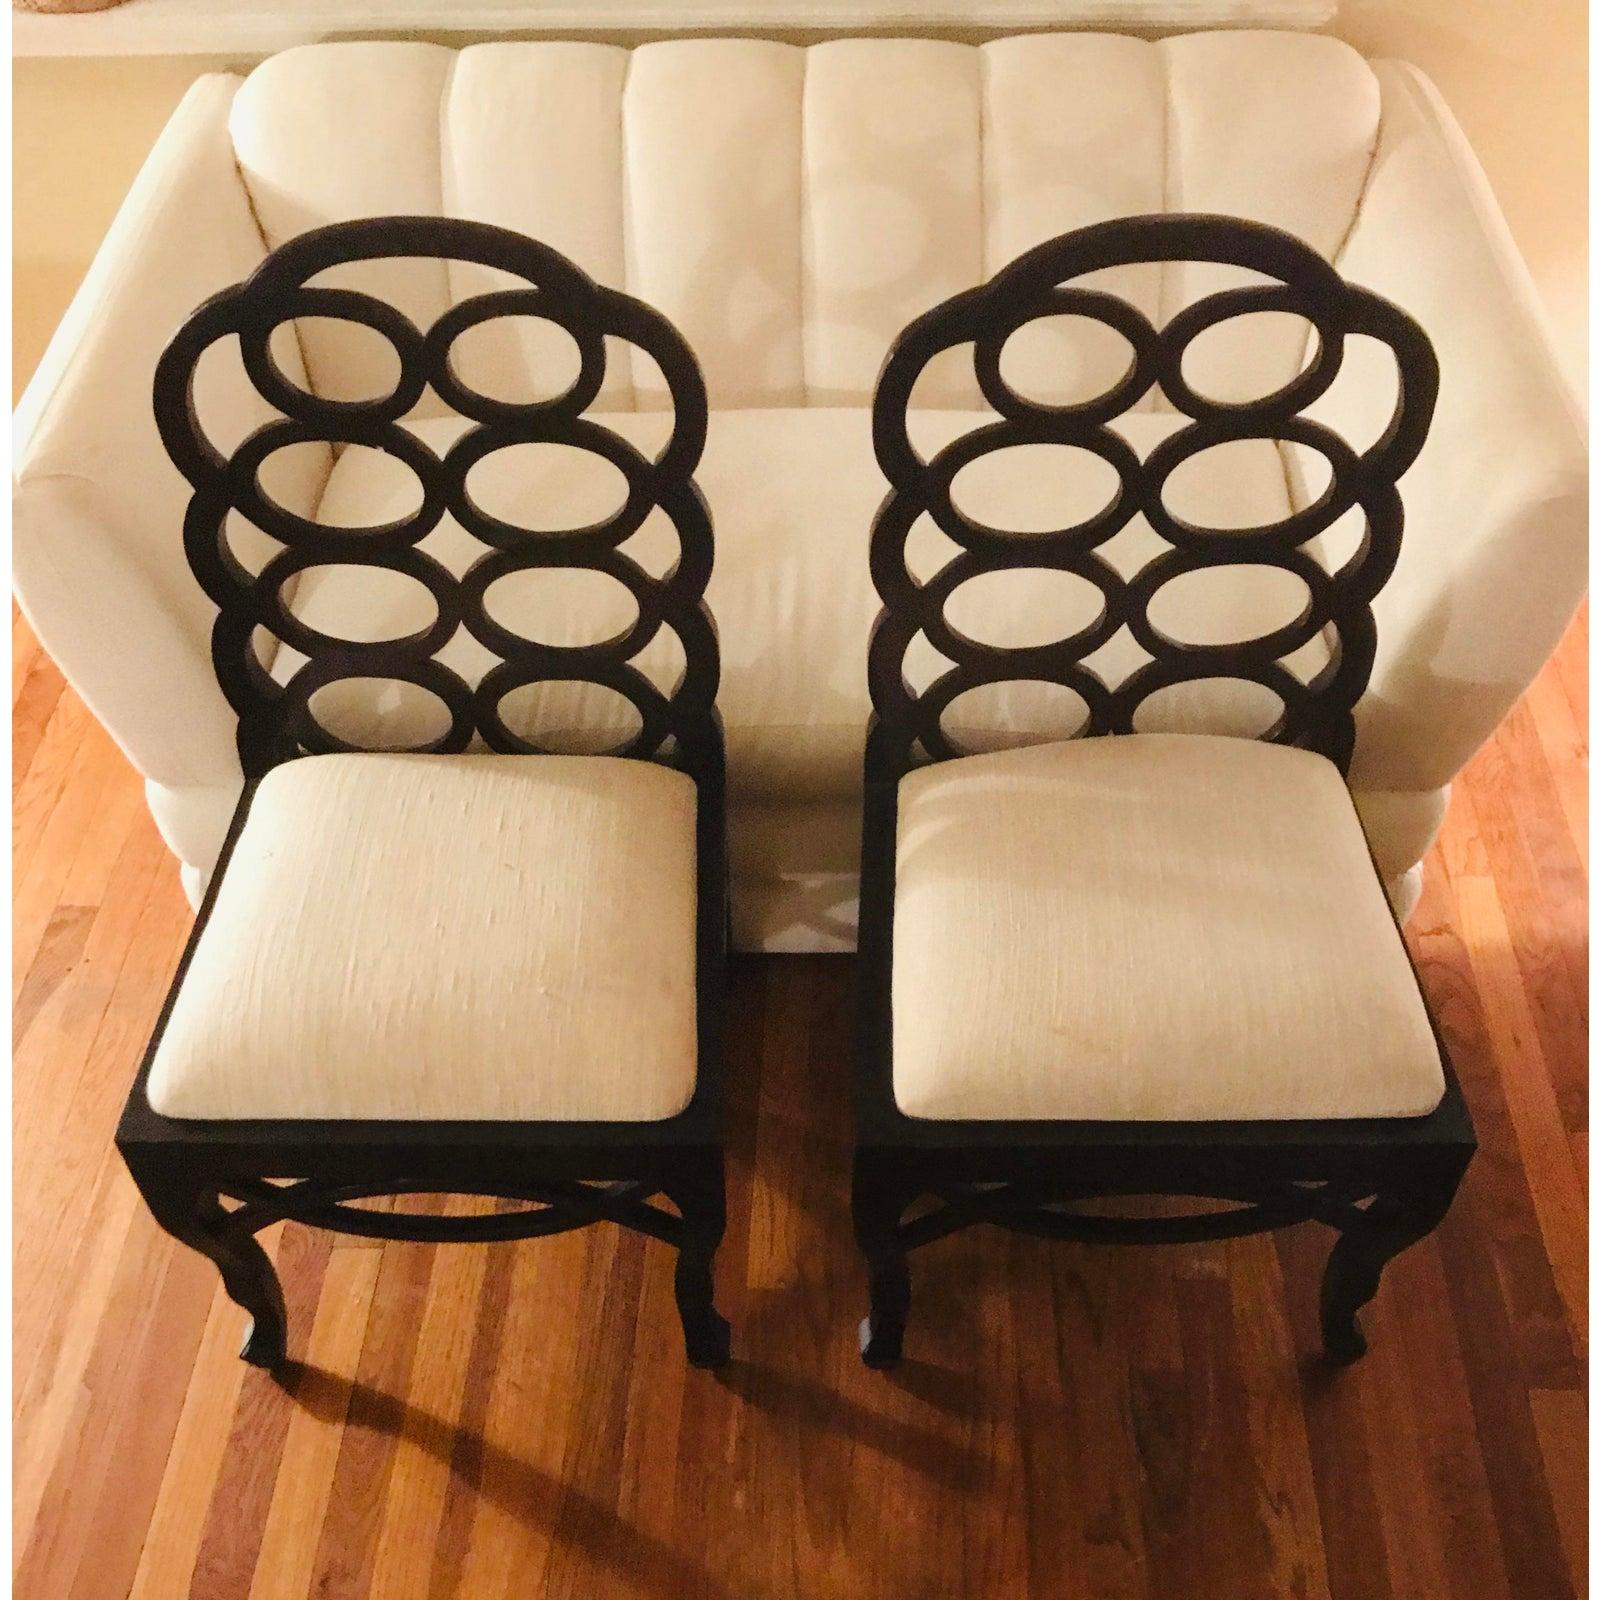 Elkins famously created this looped-back George II-style chair based on designs she found from the 18th century. These are extremely strong well-made chairs that date to the 1960s. Currently upholstered in a heavy ivory linen material.